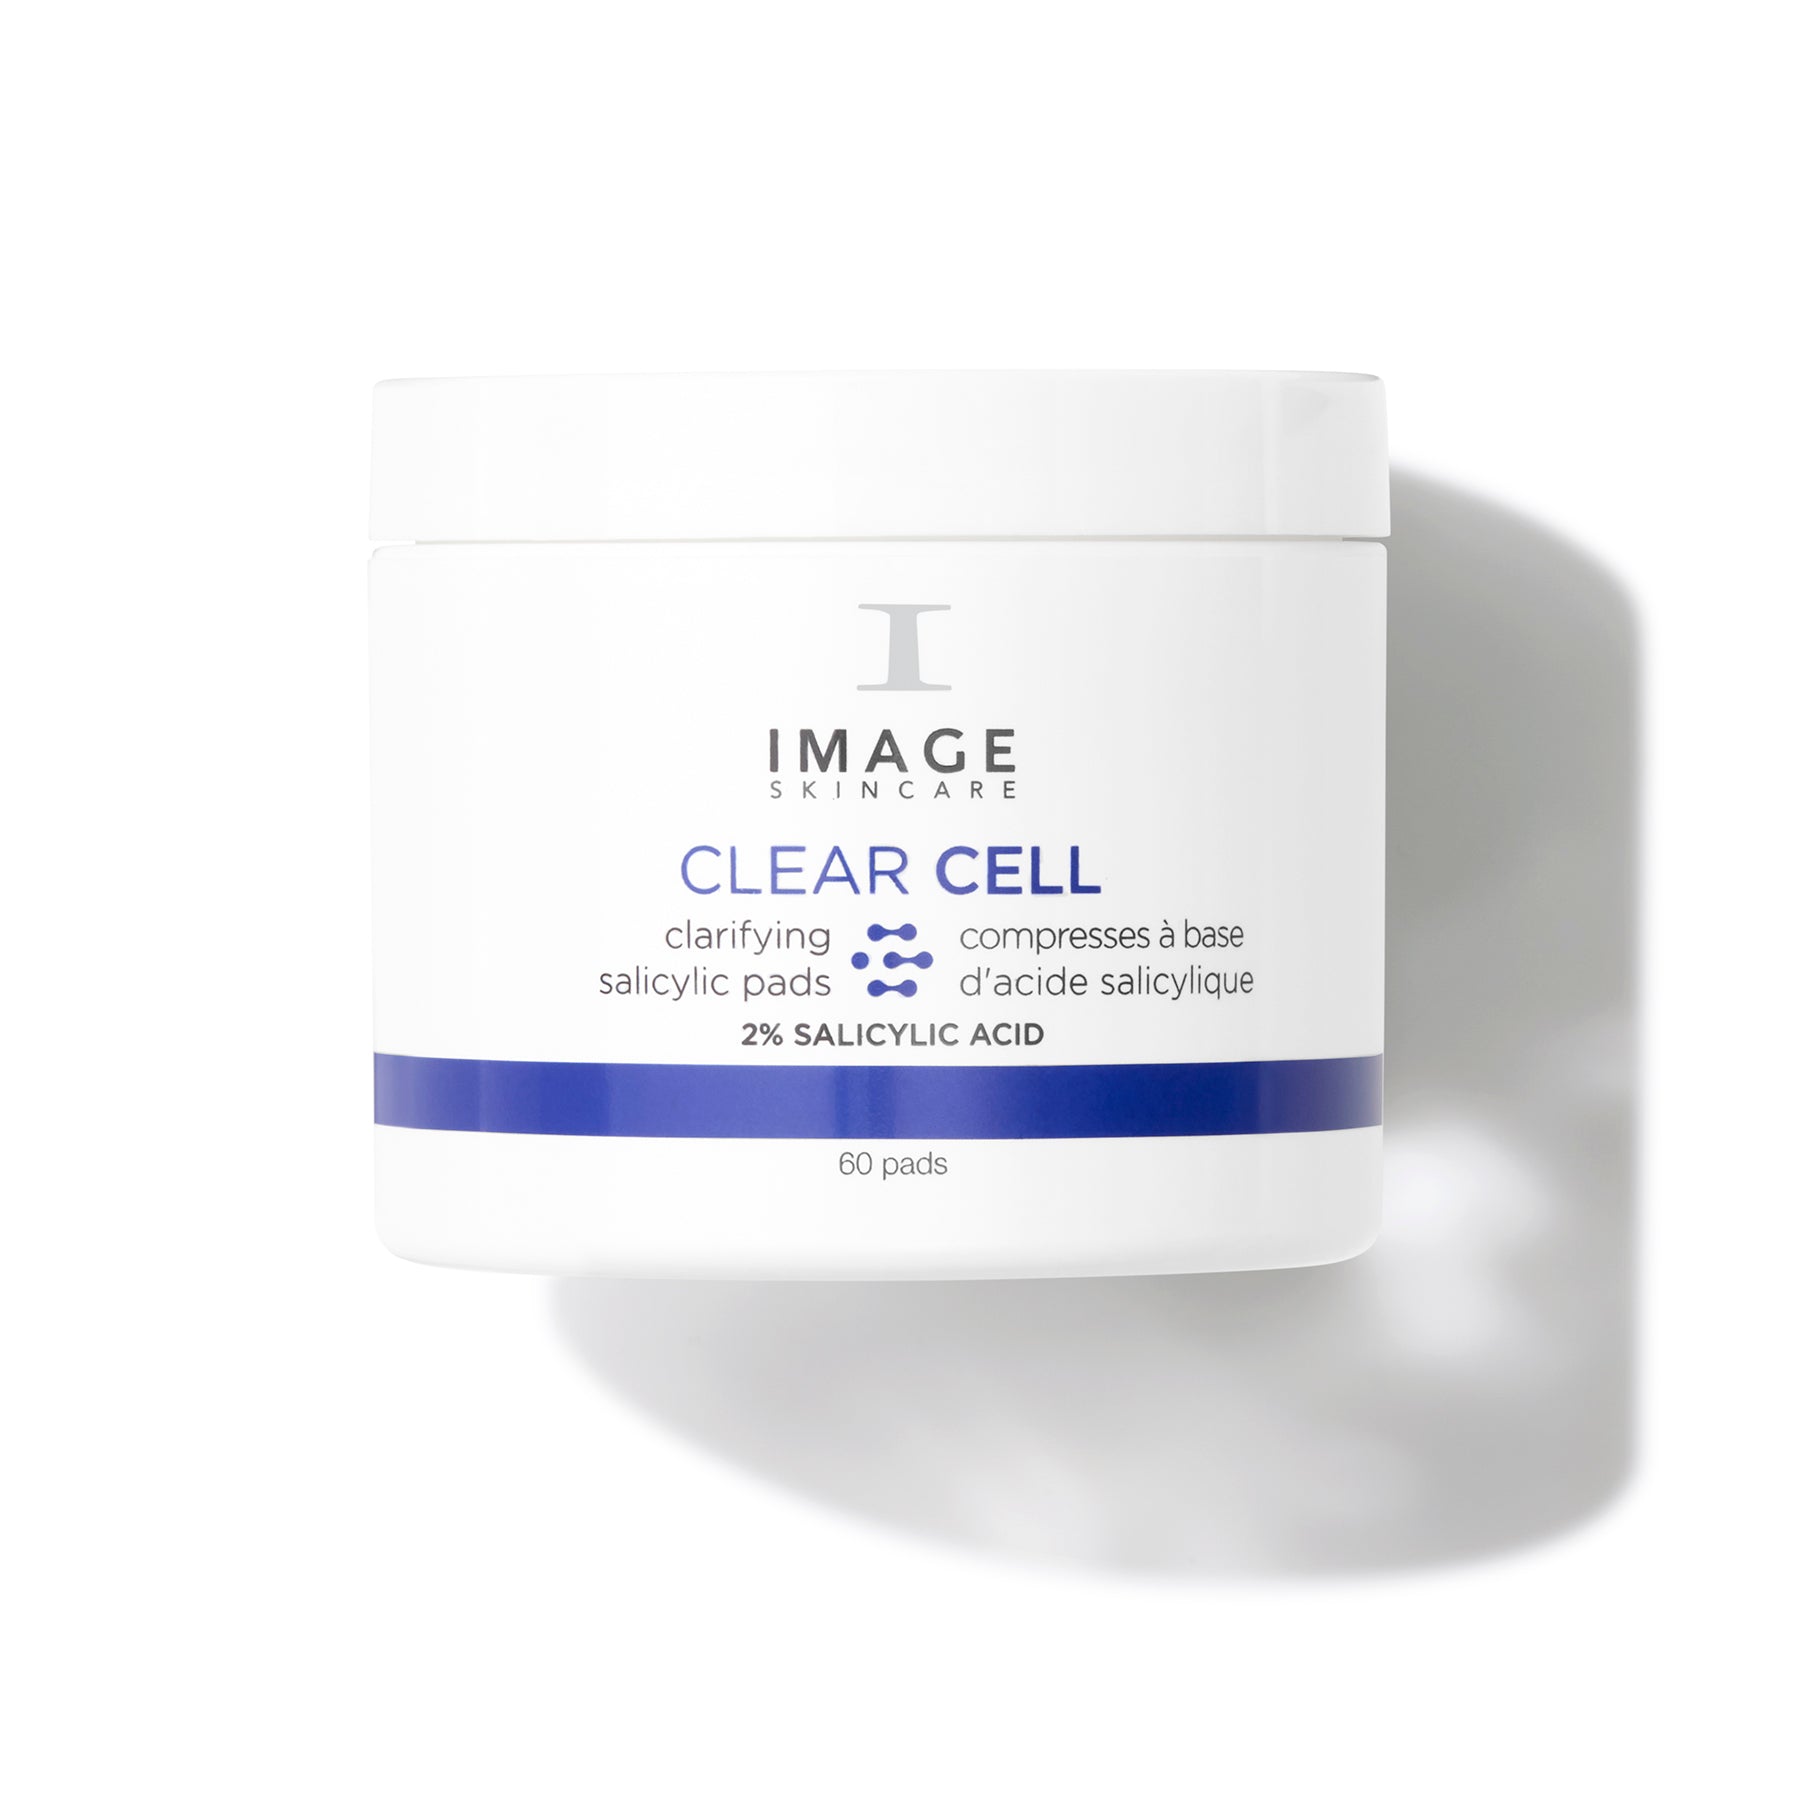 Image Skincare Clear Cell Clarifying Salicylic Pads Shop At Exclusive Beauty